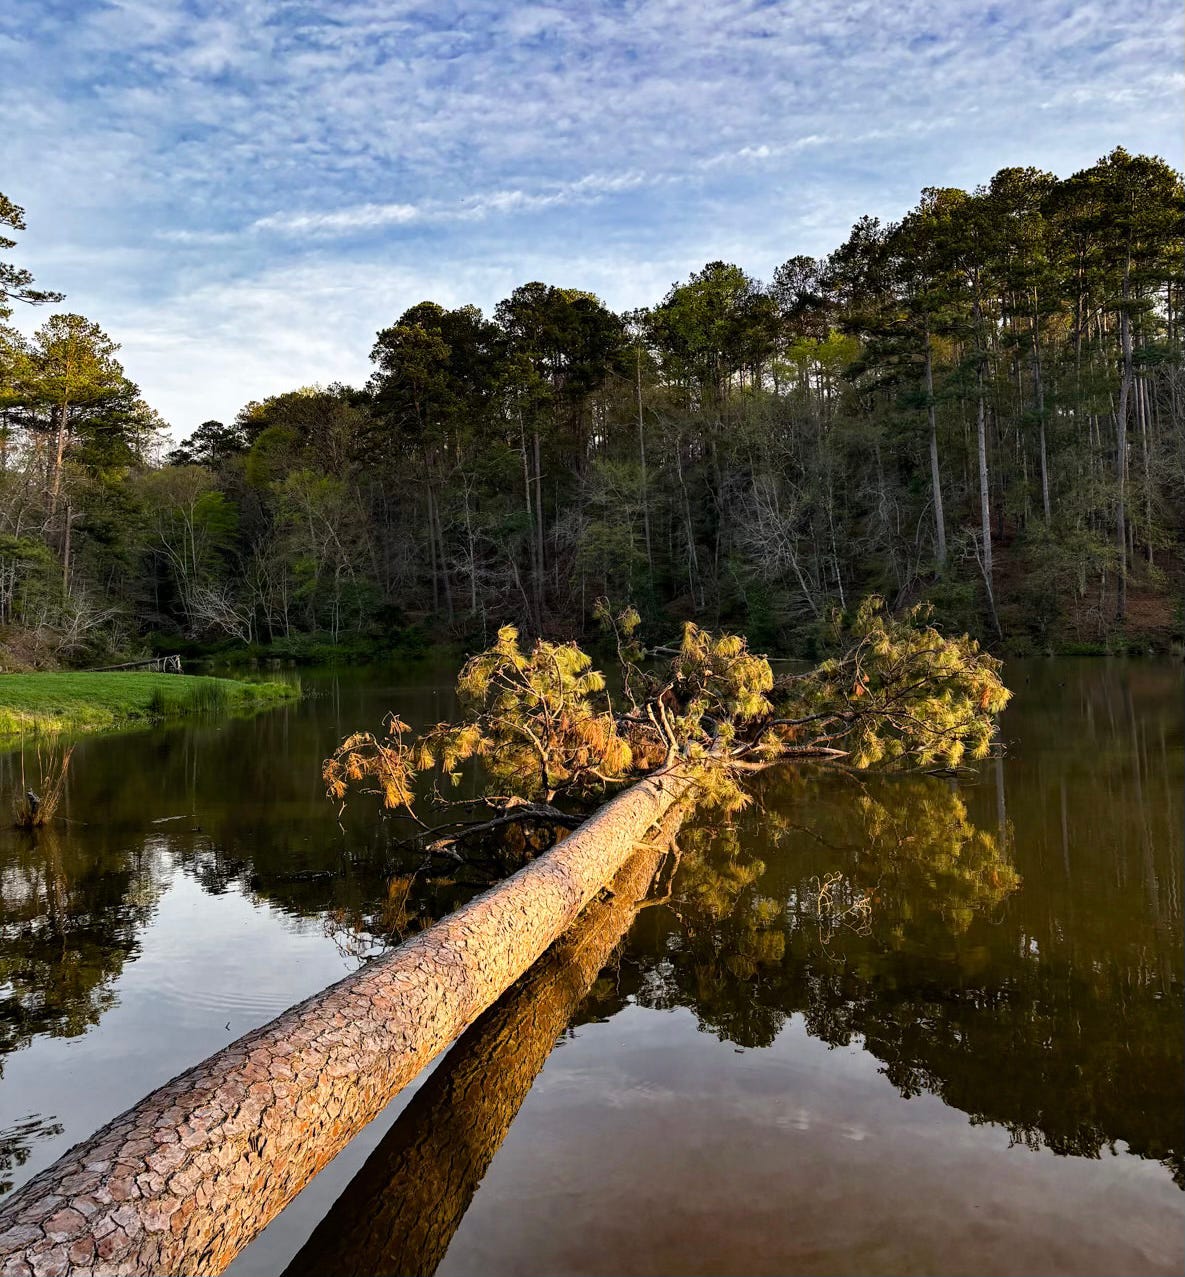 fallen pine tree lying in pond surrounded by woods